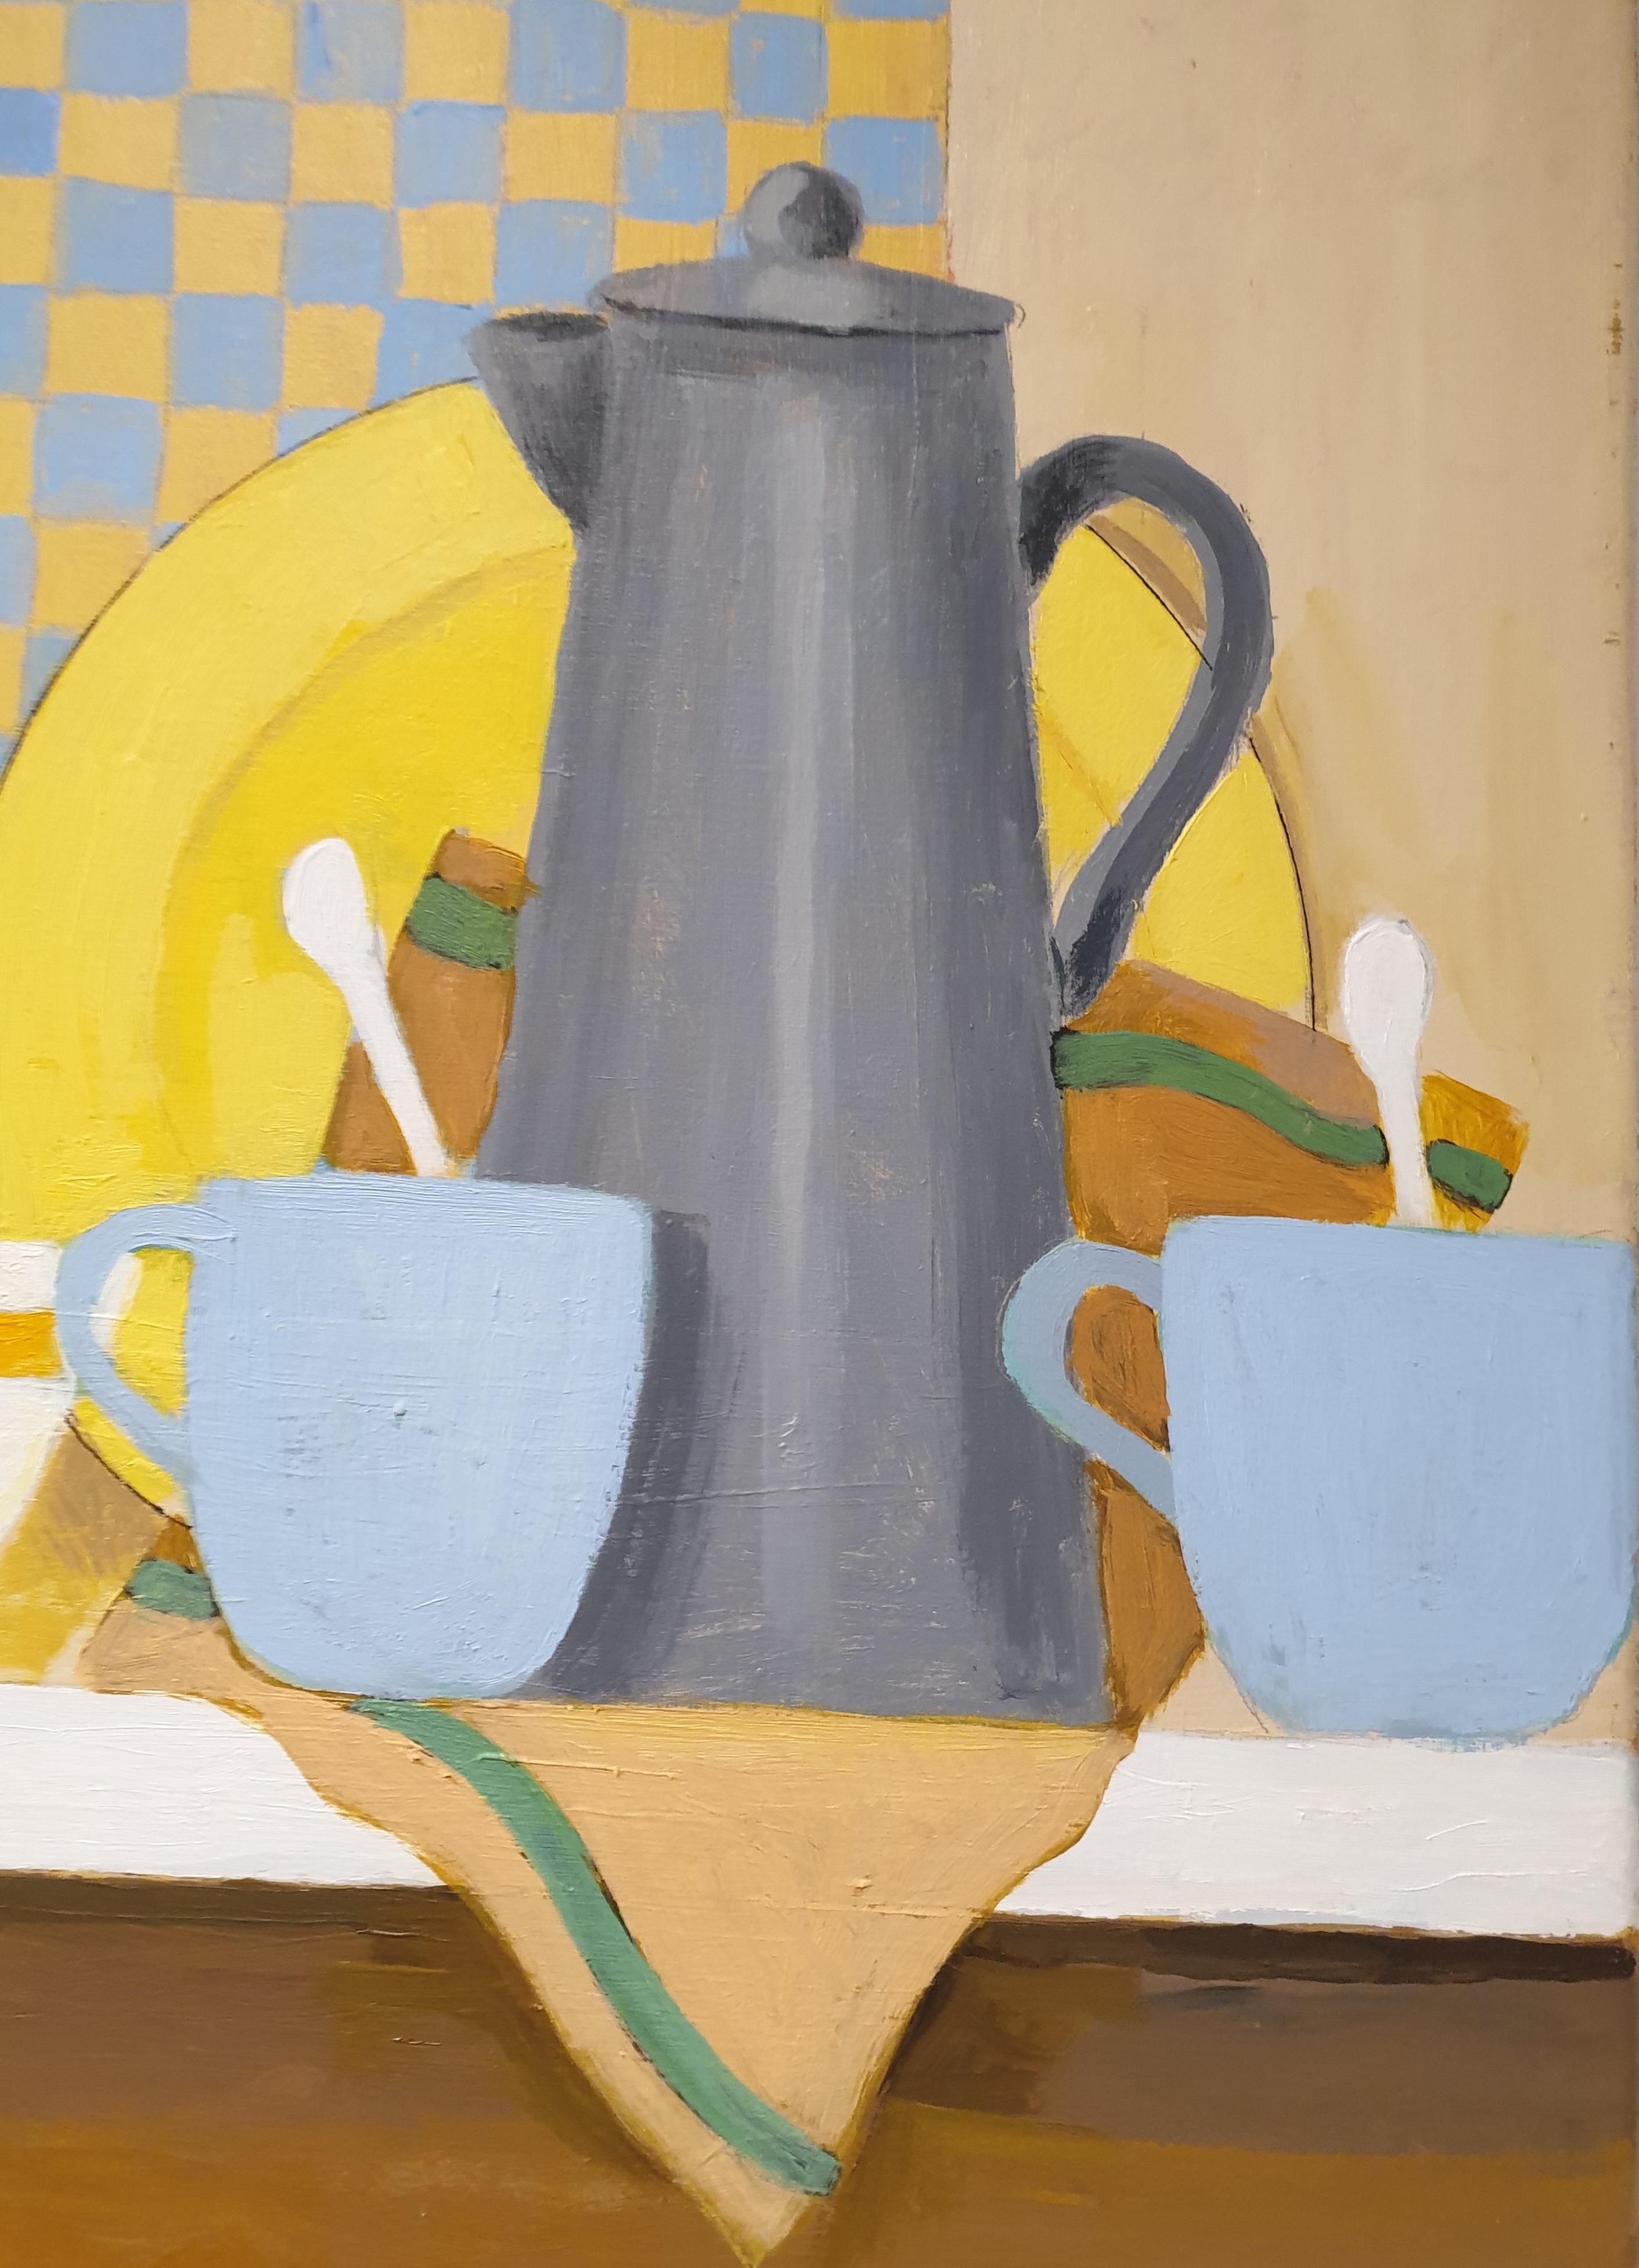 'Breakfast'. Surrealist Acrylic on Canvas. - Painting by Frank McLean Docherty 